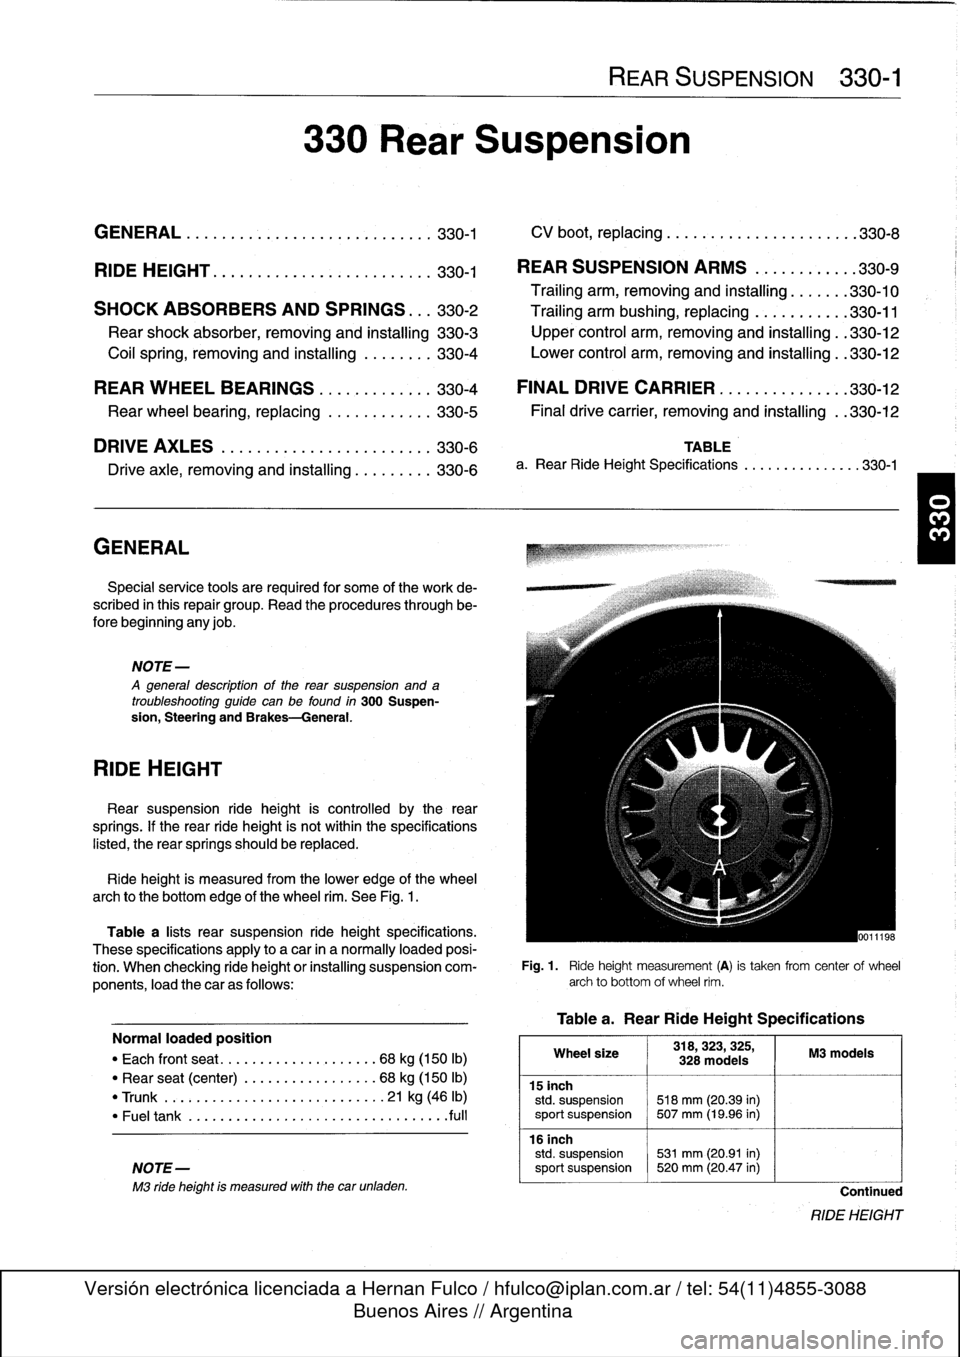 BMW 325i 1994 E36 Workshop Manual 
GENERAL
.......
.
.
.
.
.
.
.
.
.
.......
.
...
.330-1

	

CV
boot,
replacing
........
.
.
.
.........
.
.330-8

RIDE
HEIGHT
....
.
.
.
.
.
...
.
...
.
.
.
.
.
...
.
330-1

	

REAR
SUSPENSION
ARMS
.
